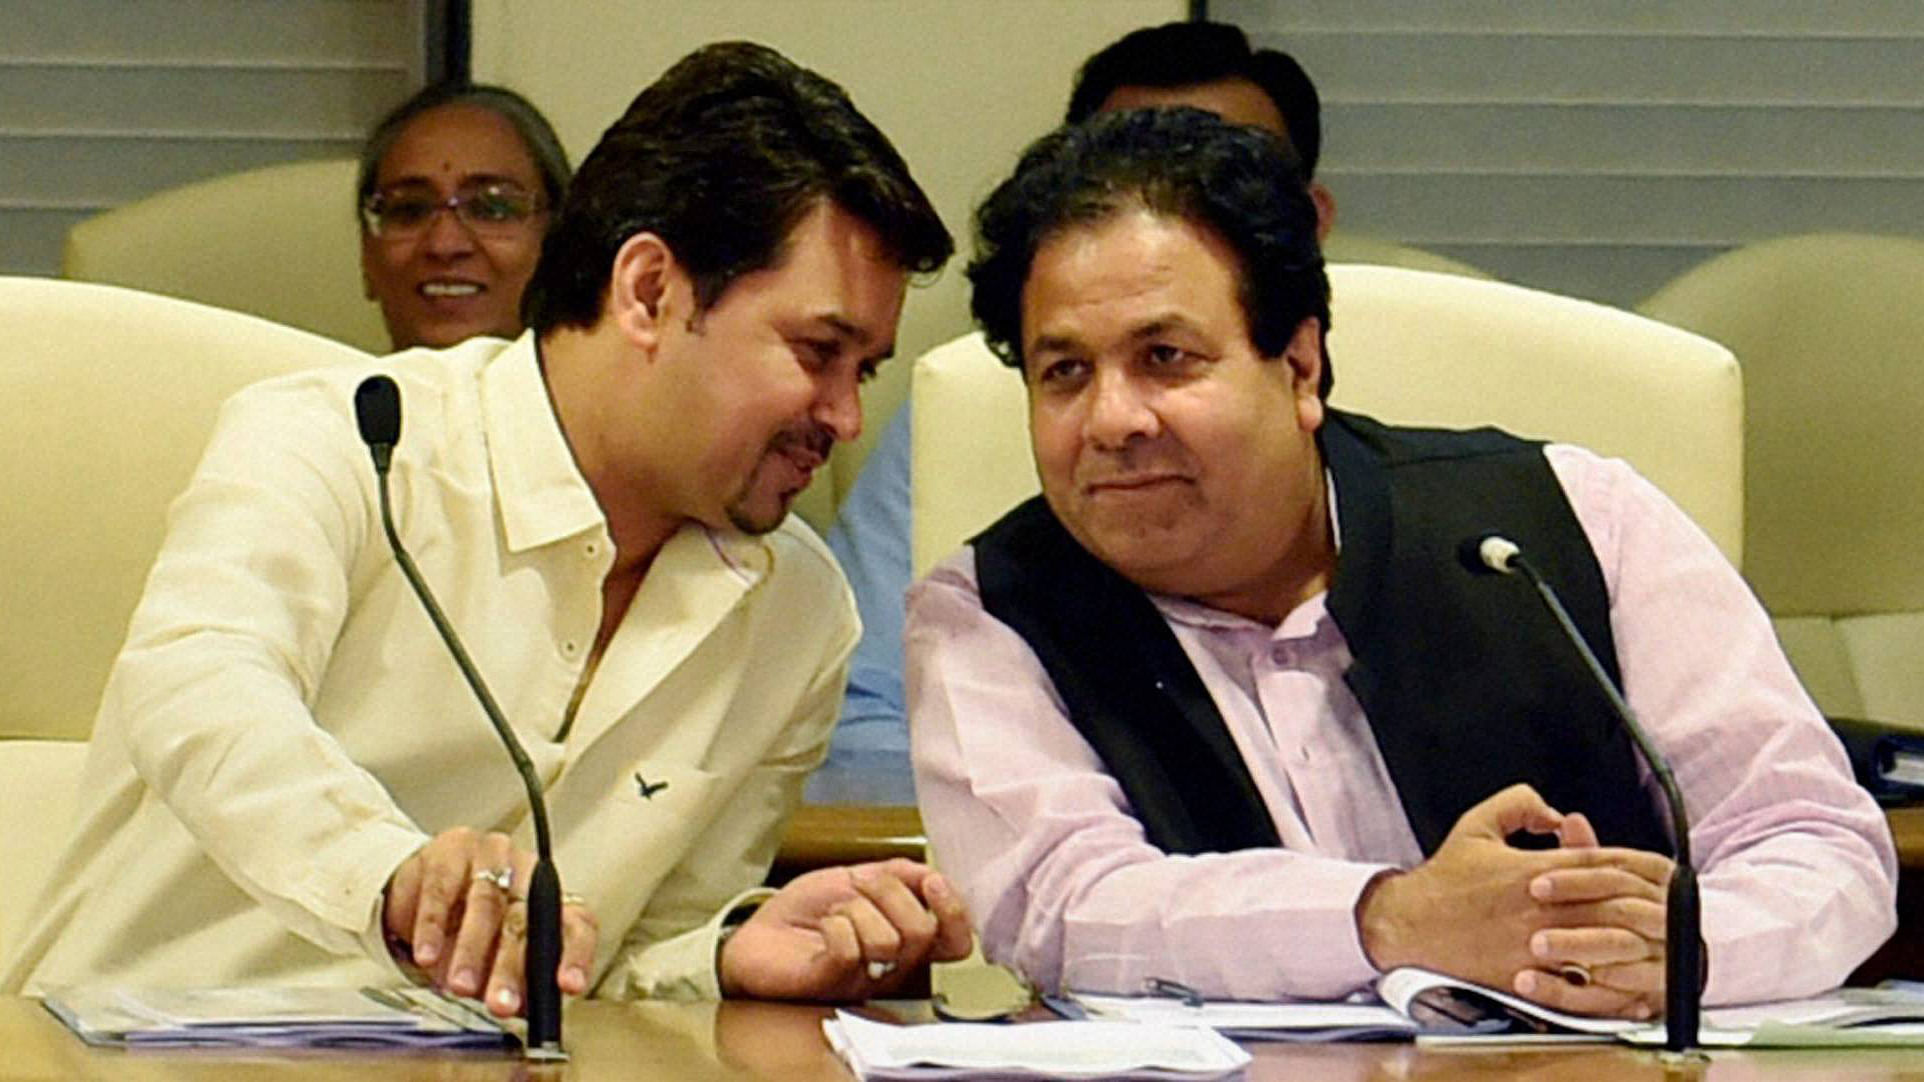 Members of Parliament, Anurag Thakur (L) and Rajeev Shukla (R) hold prominent posts in the BCCI at the moment. (Photo: PTI)